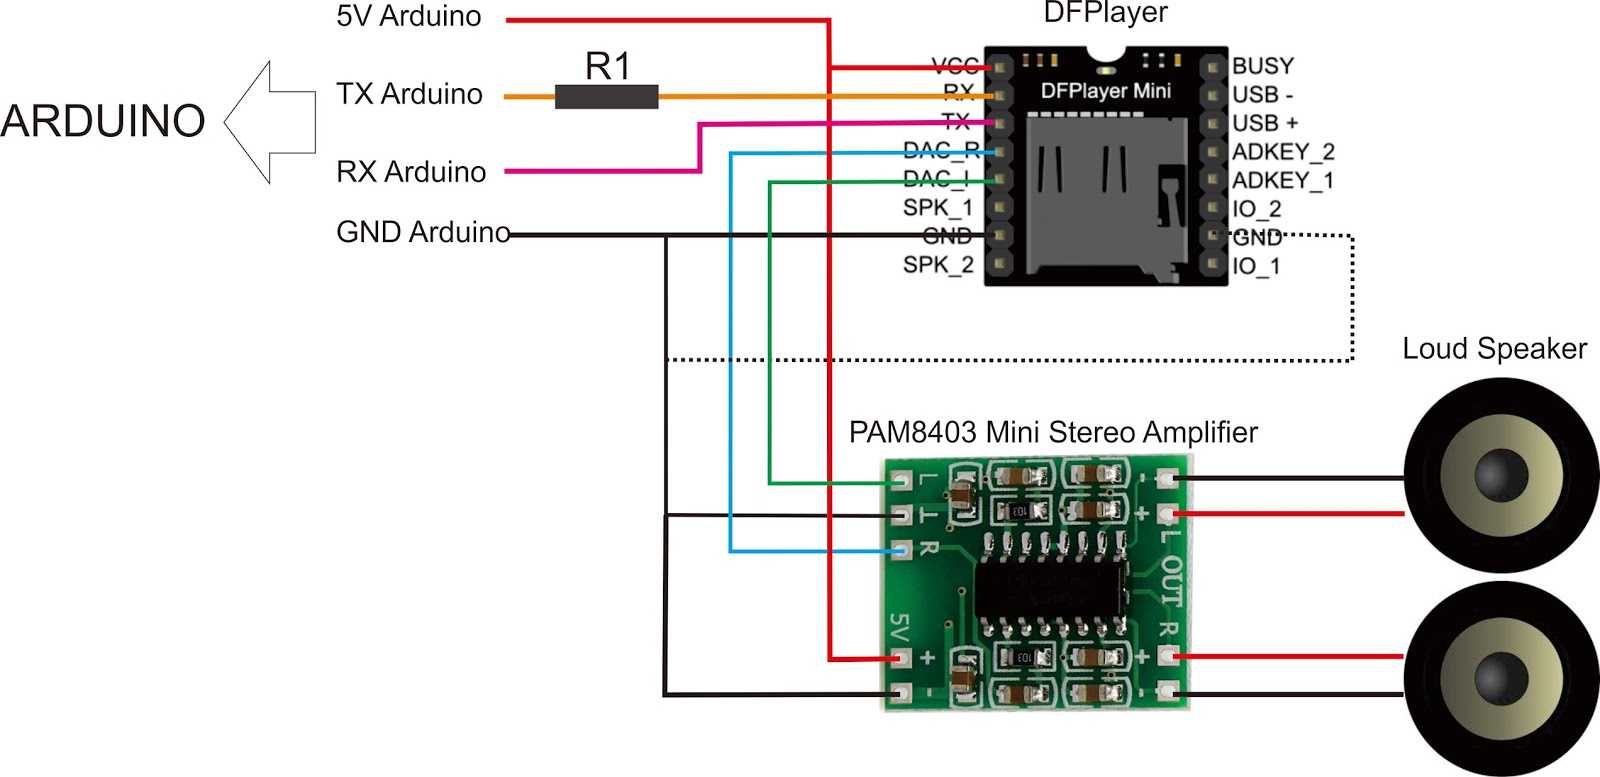 DF Player Serial mp3 player for Arduino Audio Project | Blog Tiga Putra